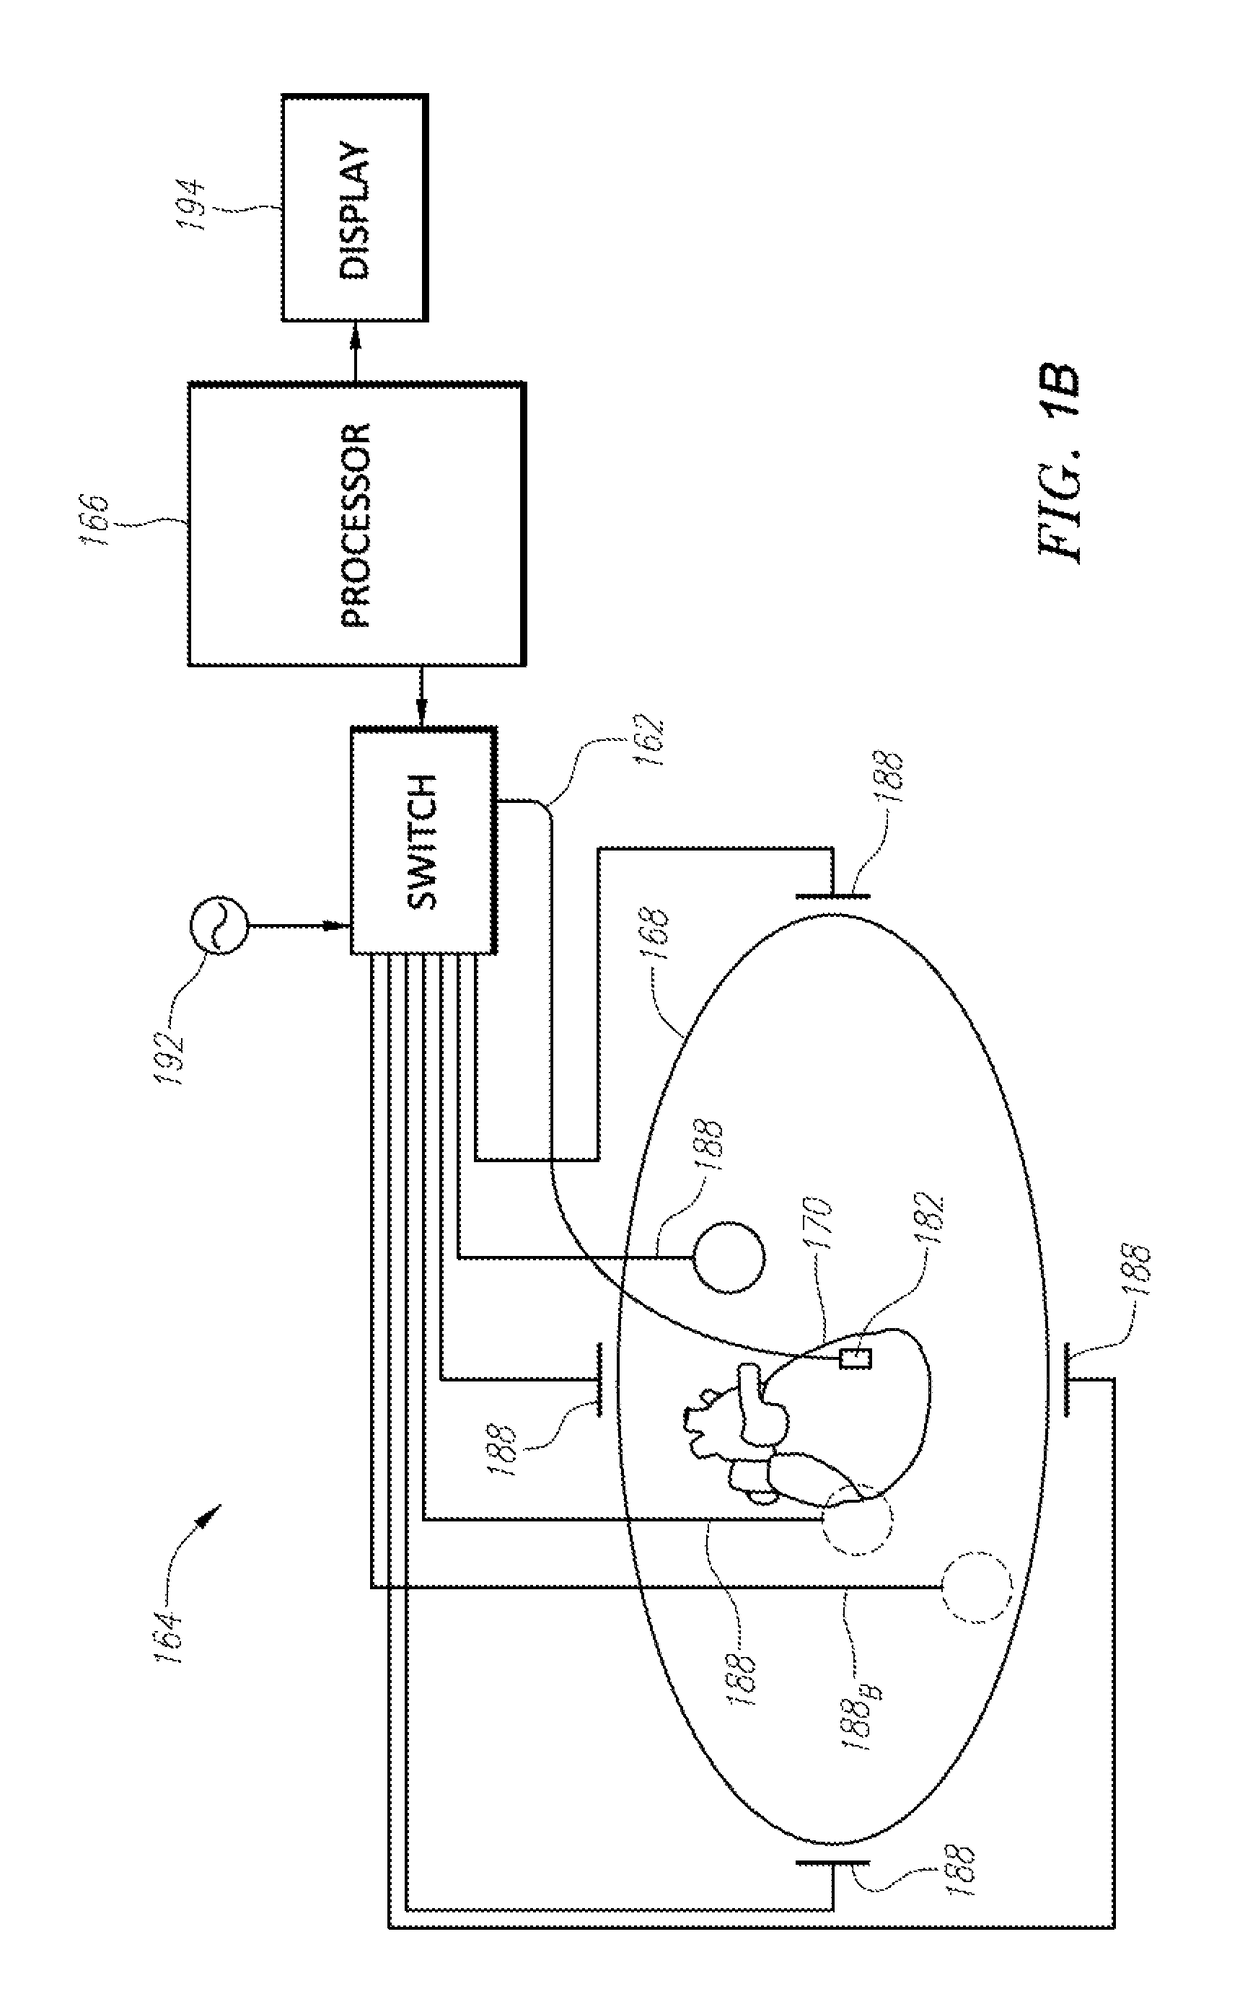 Systems and methods for orientation independent sensing